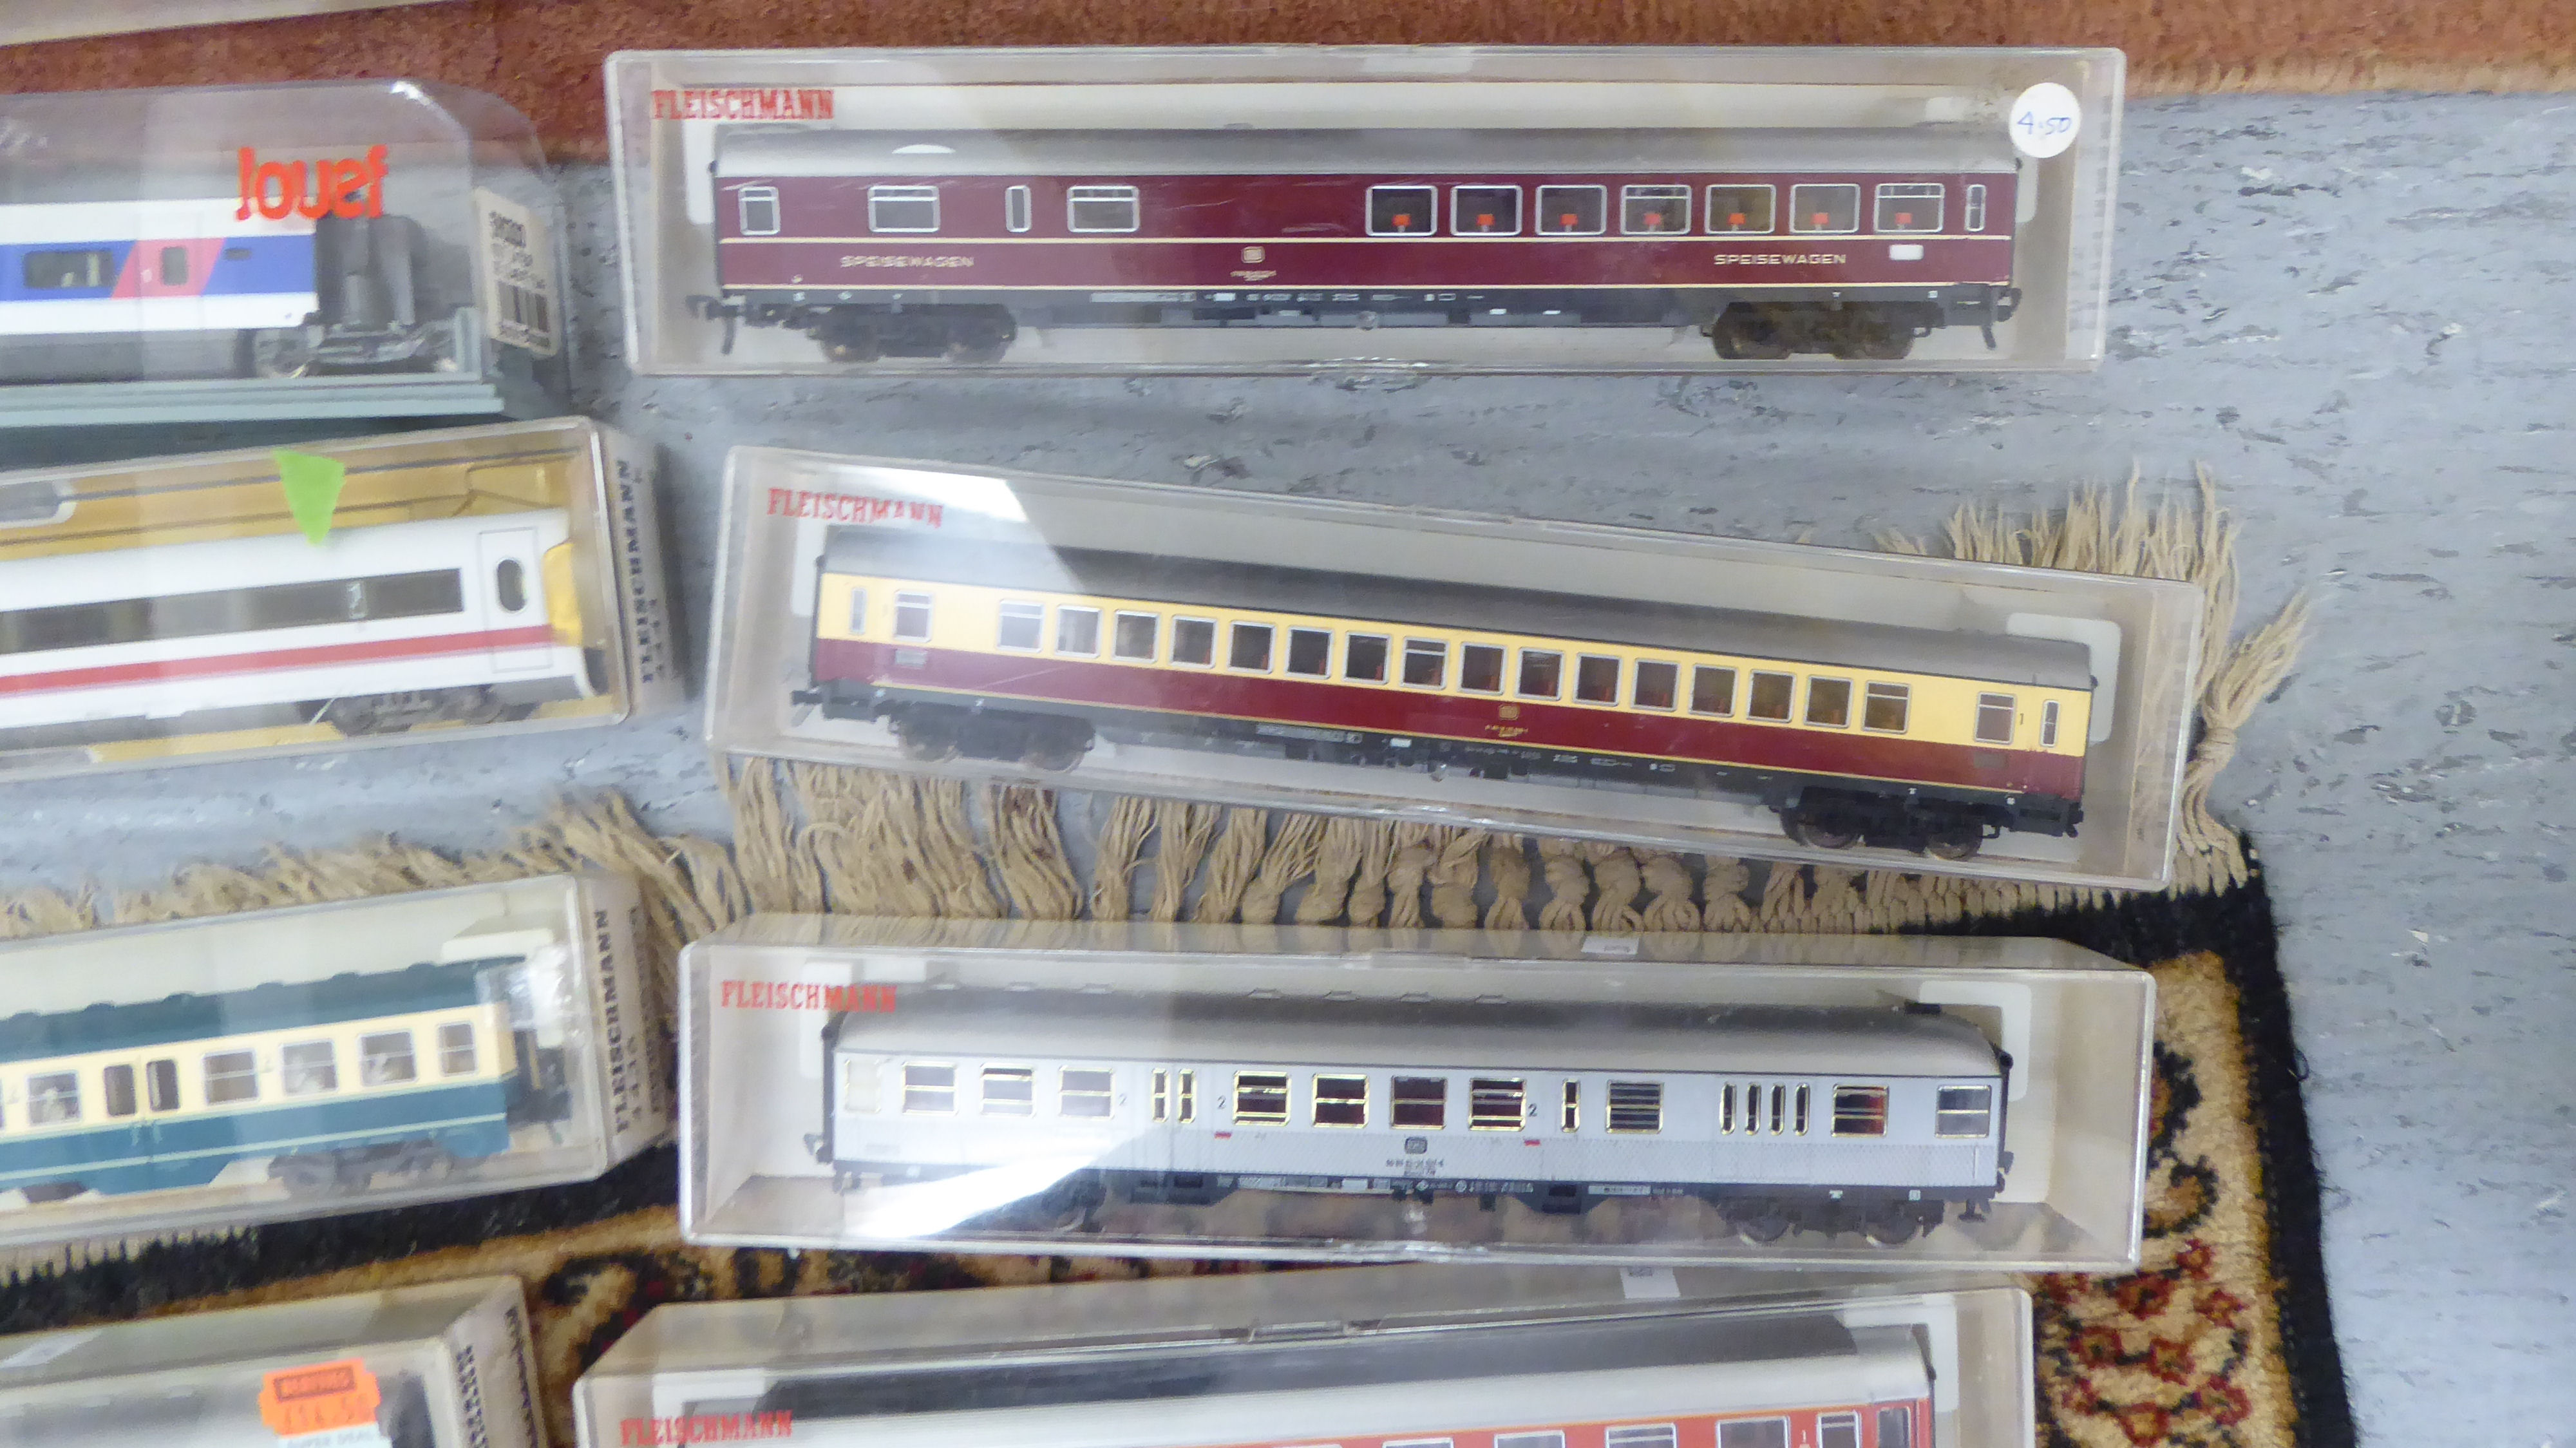 Fleischmann HO gauge model railway accessories: to include an Intercity Express and various coaches - Image 8 of 8